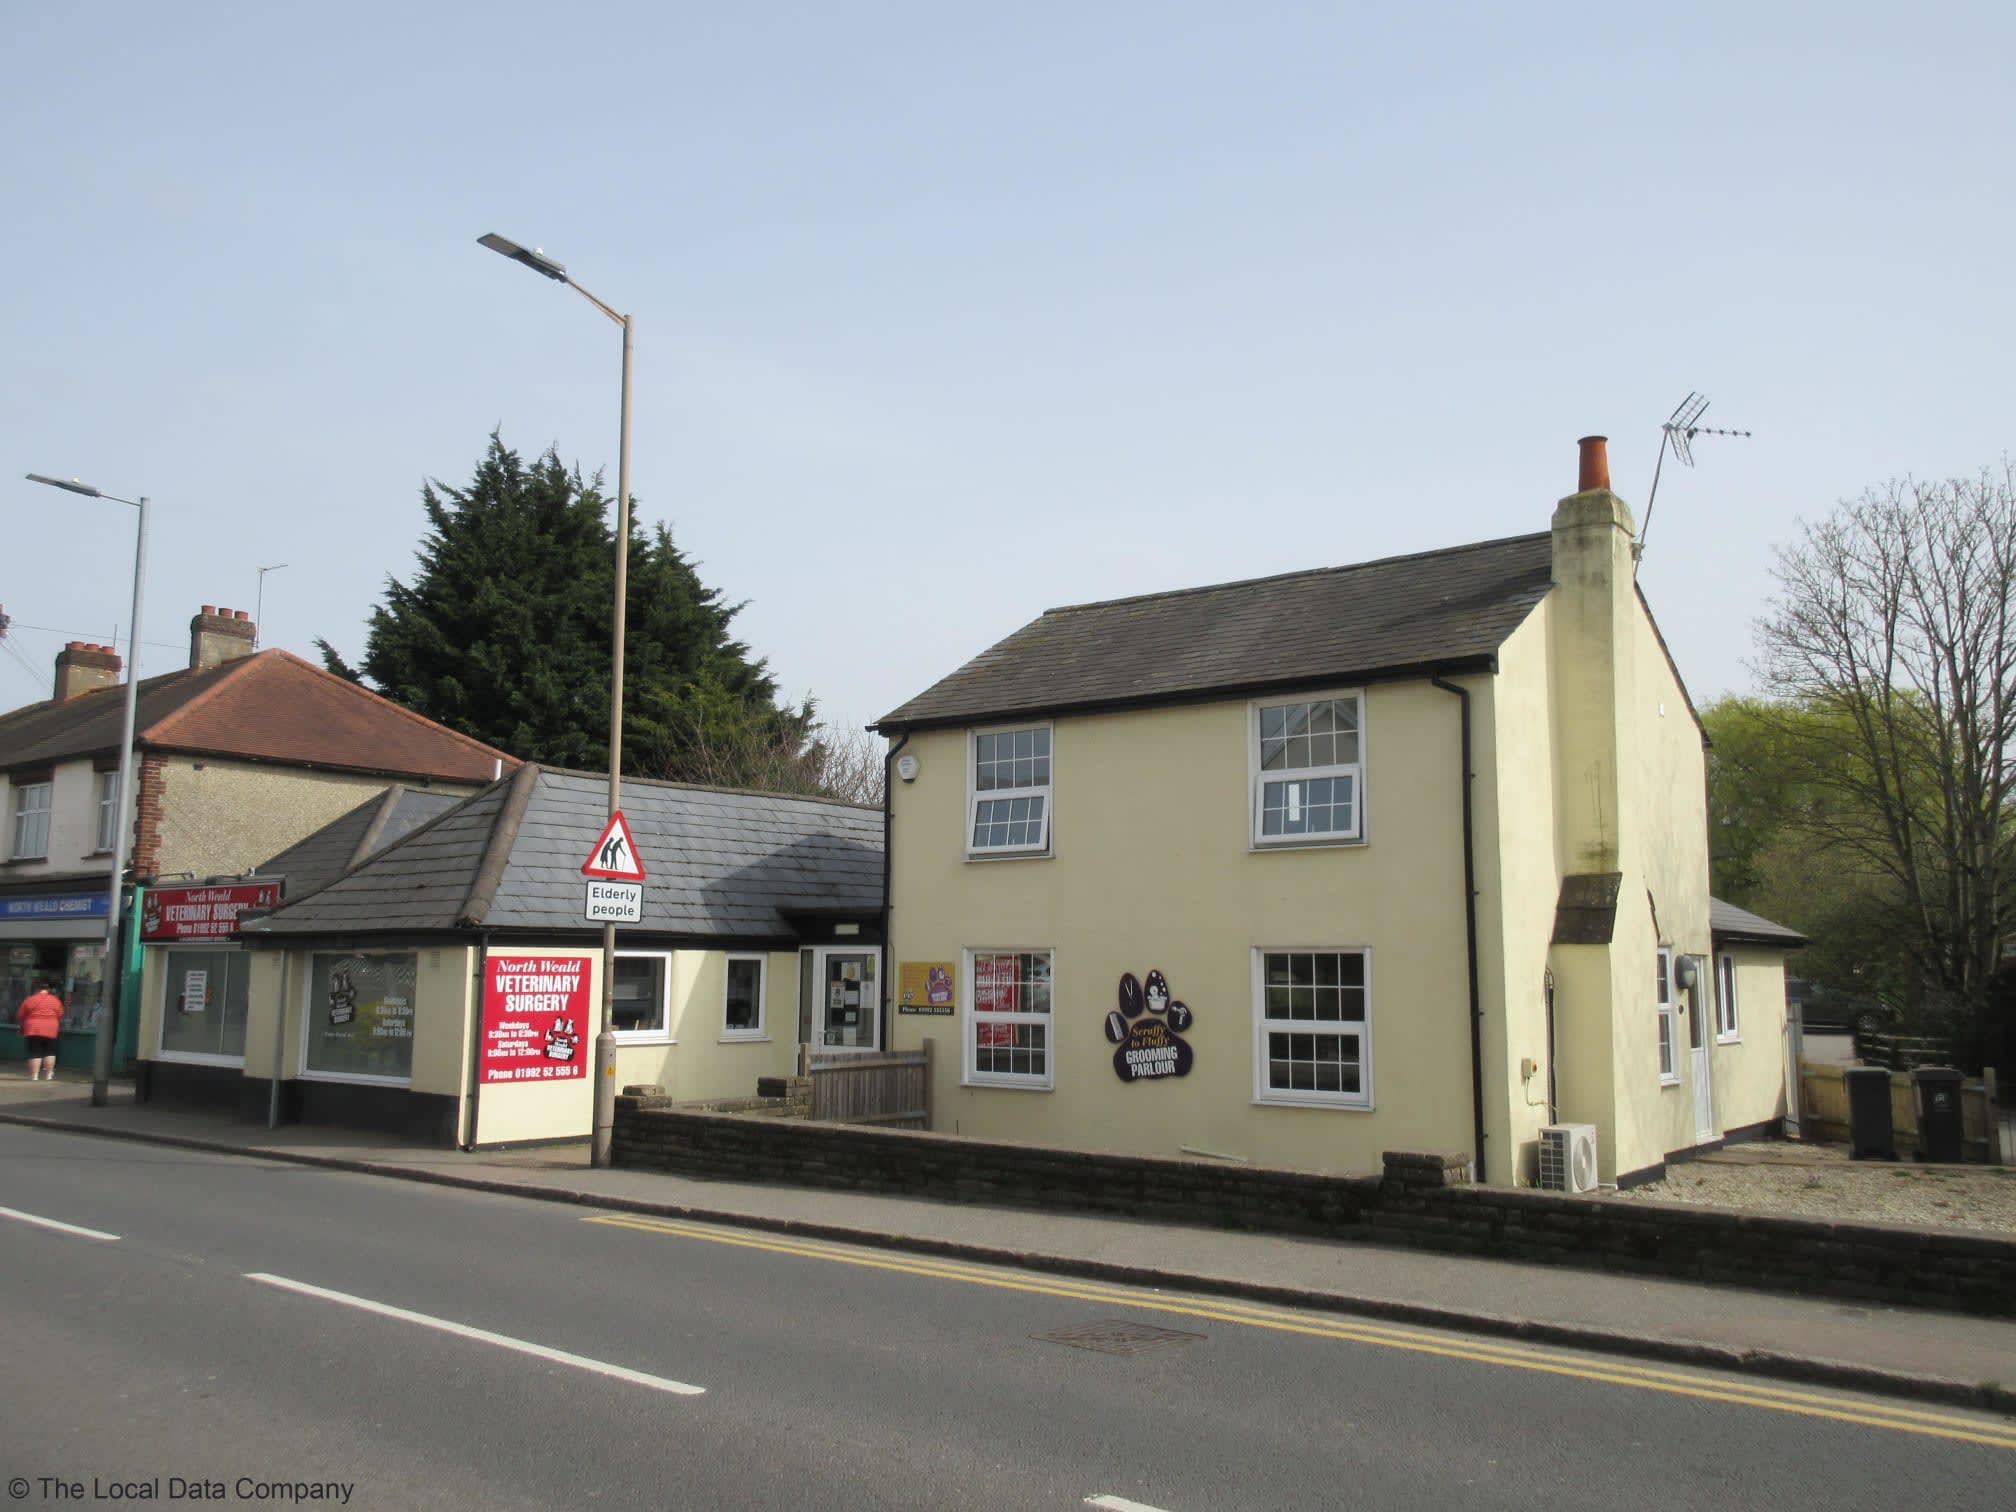 Images North Weald Veterinary Surgery